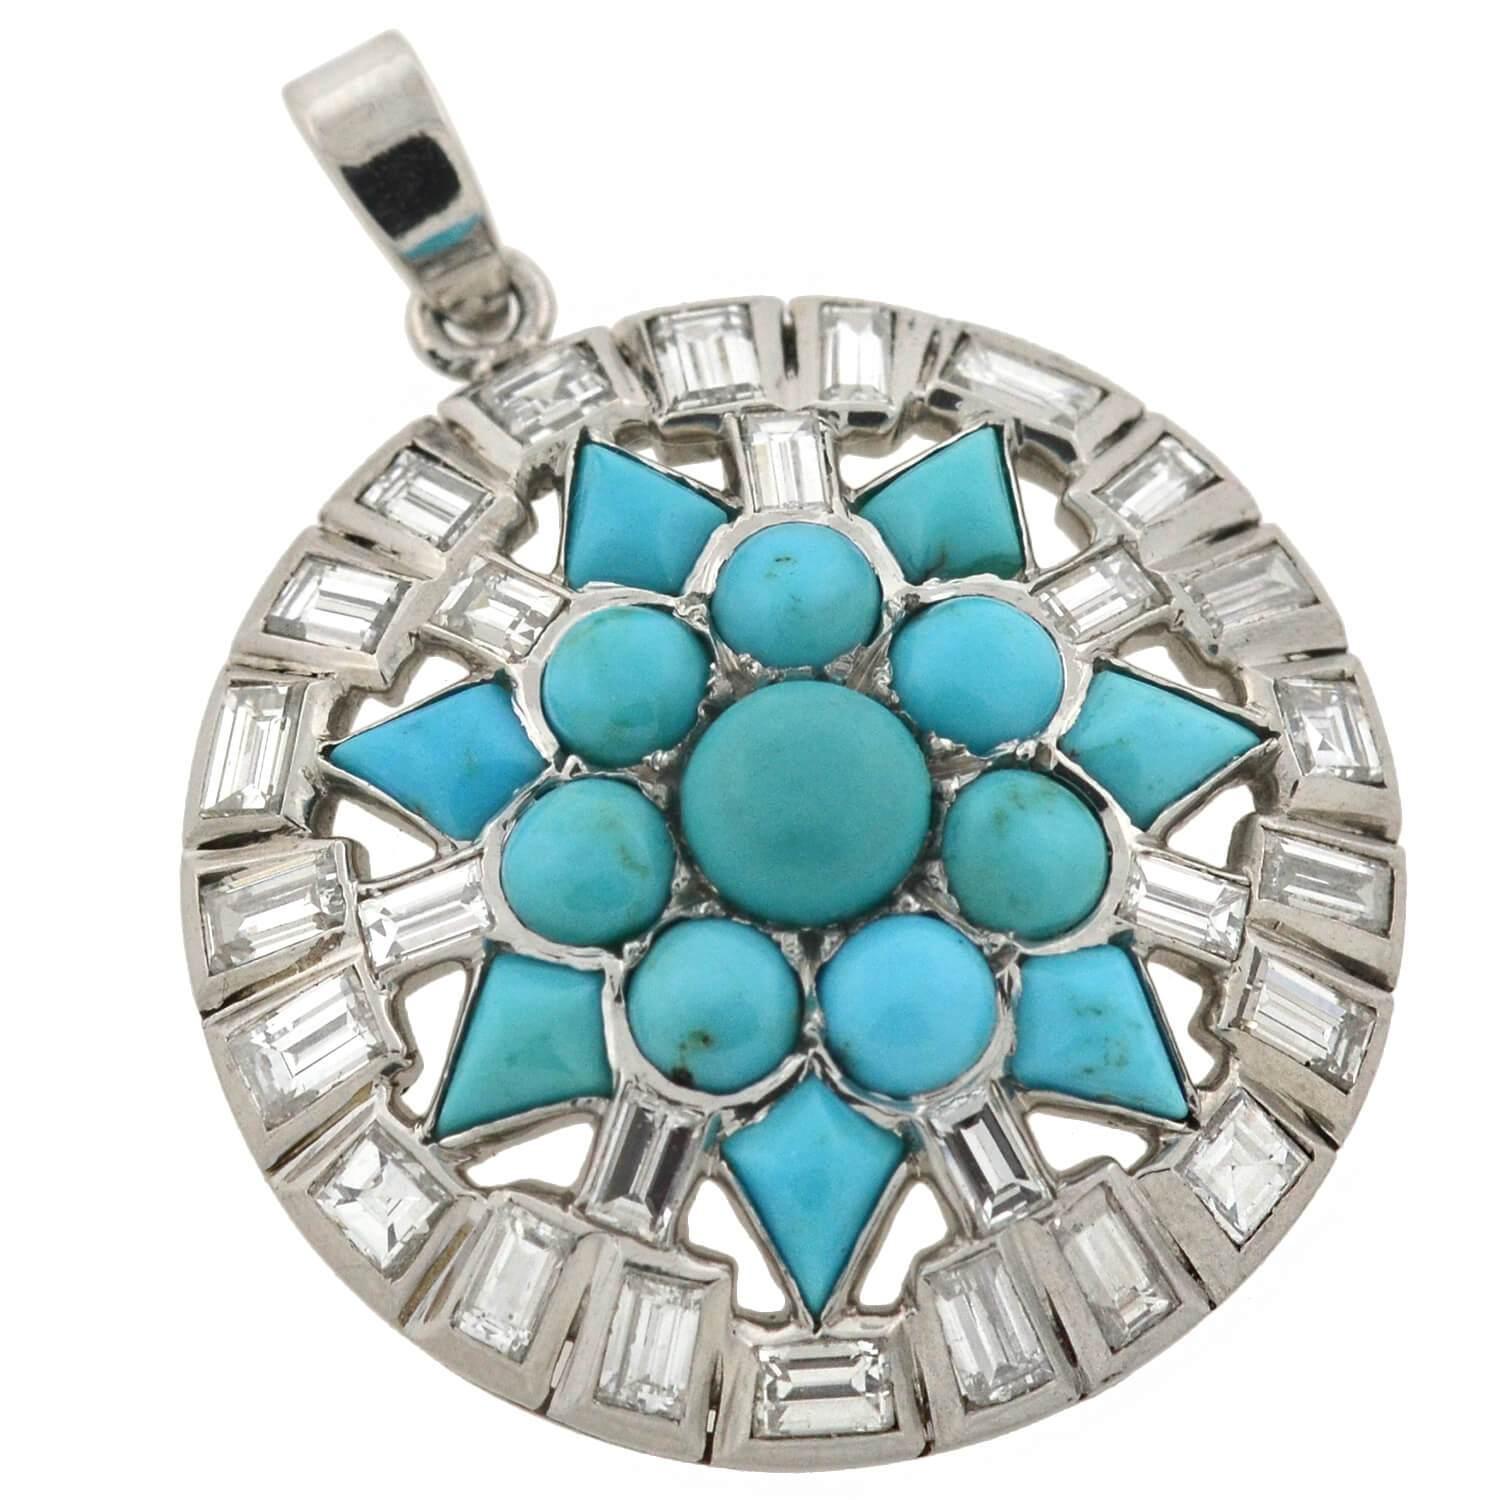 A gorgeous and highly unusual turquoise and diamond starburst pendant from the late Art Deco (ca1930) era! This beautiful piece is crafted in platinum and displays a stunning 7-point star design at the center, detailed with vibrant cabochon